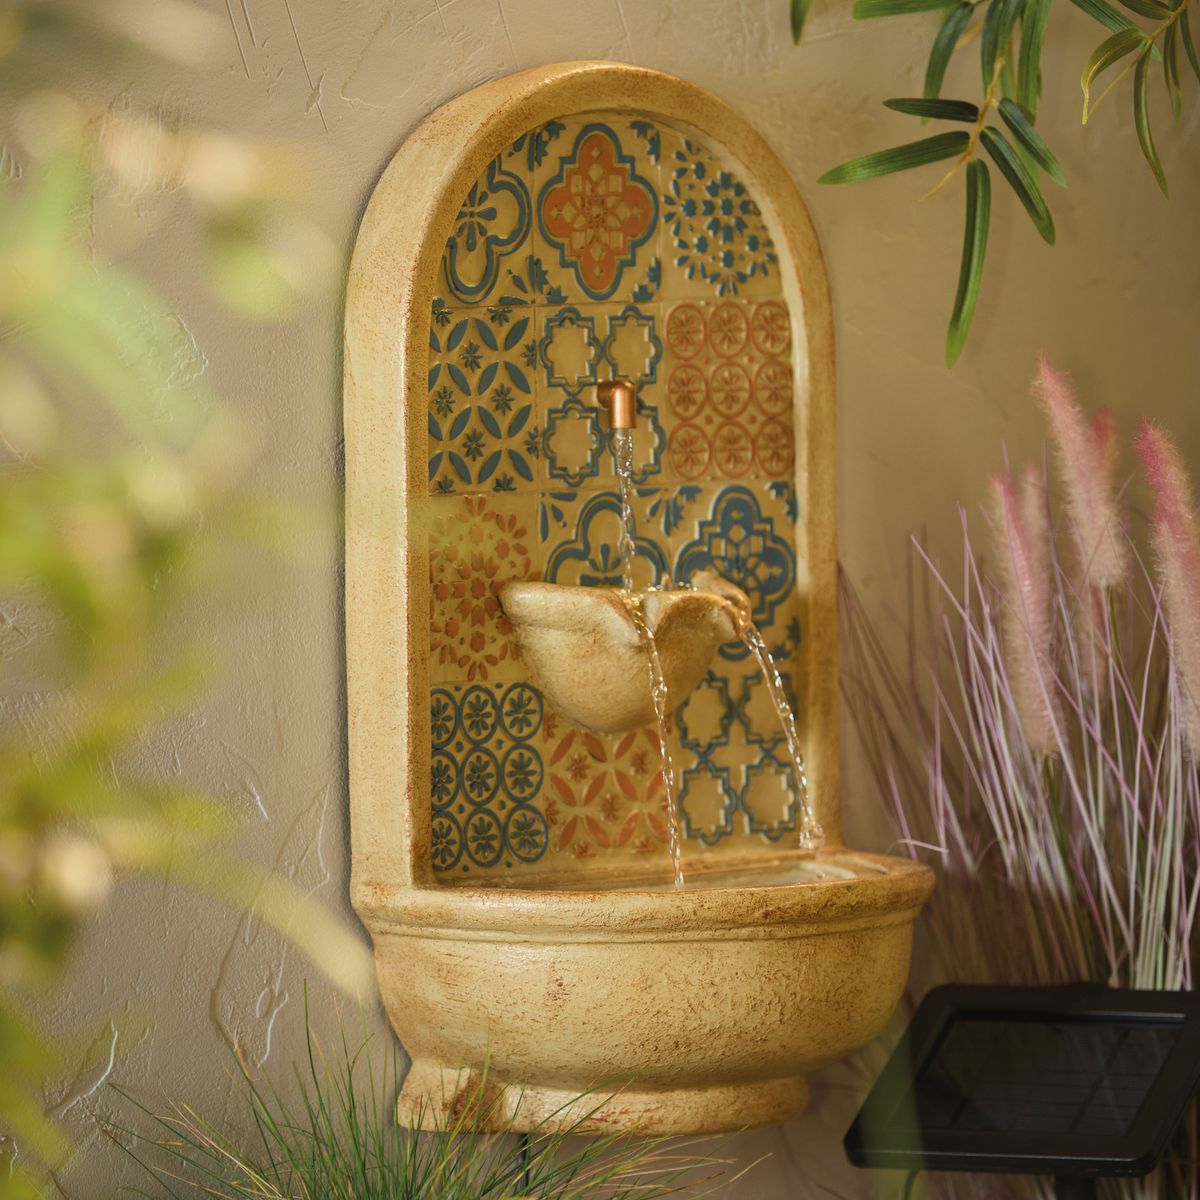 Aldi's stunning £50 mosaic water feature is the star of its new garden range inspired by the Italian Riviera